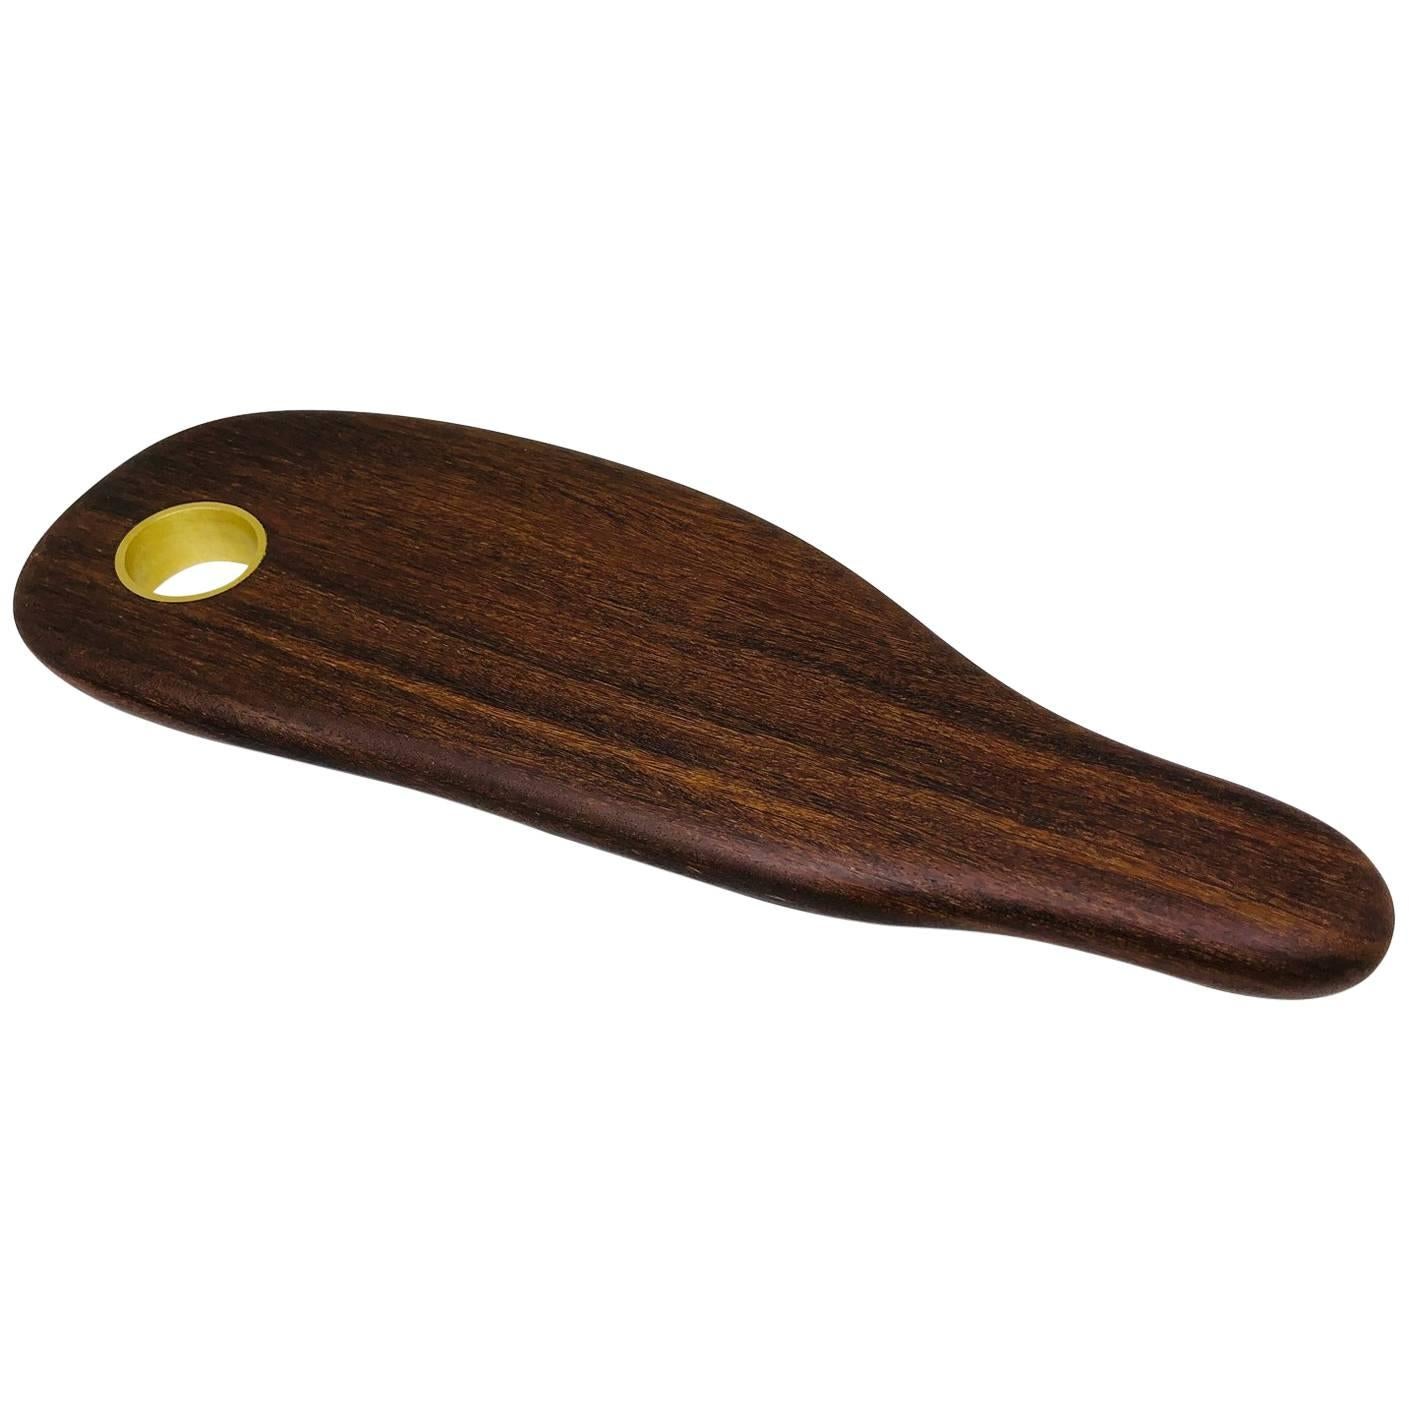 Cutting Gourmet Board Made of Tropical Hardwood in Brazilian Contemporary Design